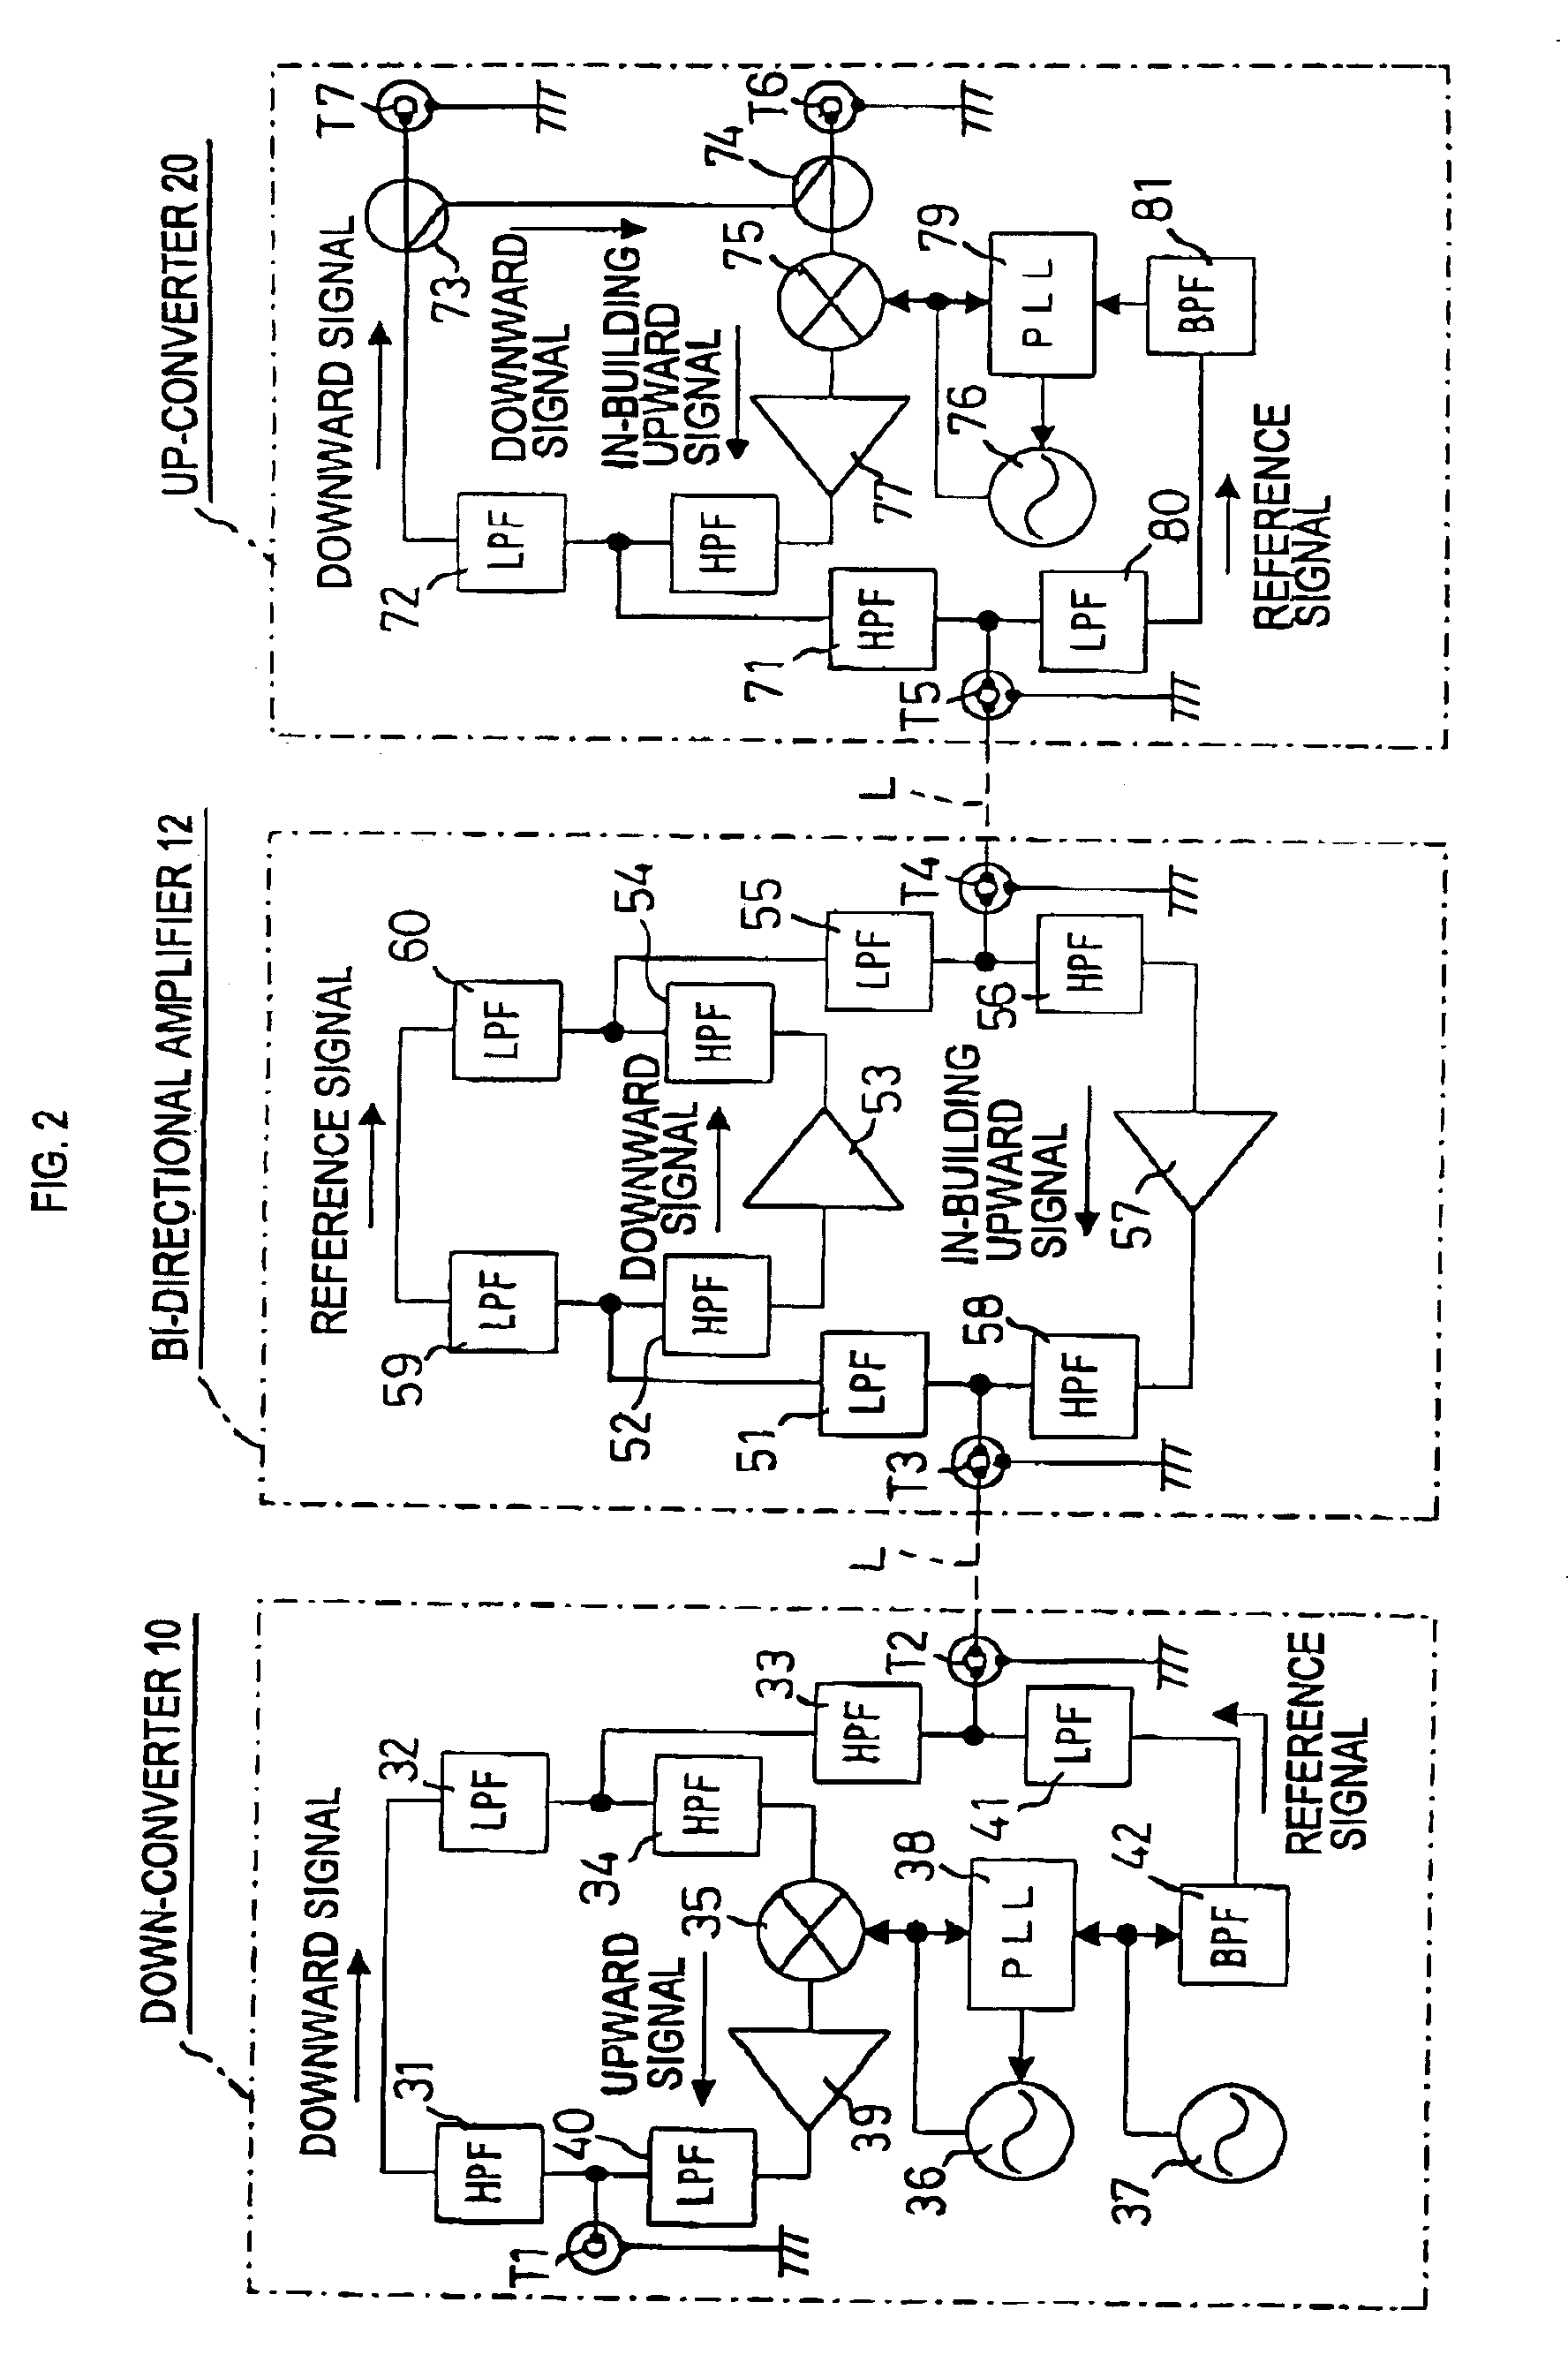 In-building CATV system, down-converter, up-converter and amplifier